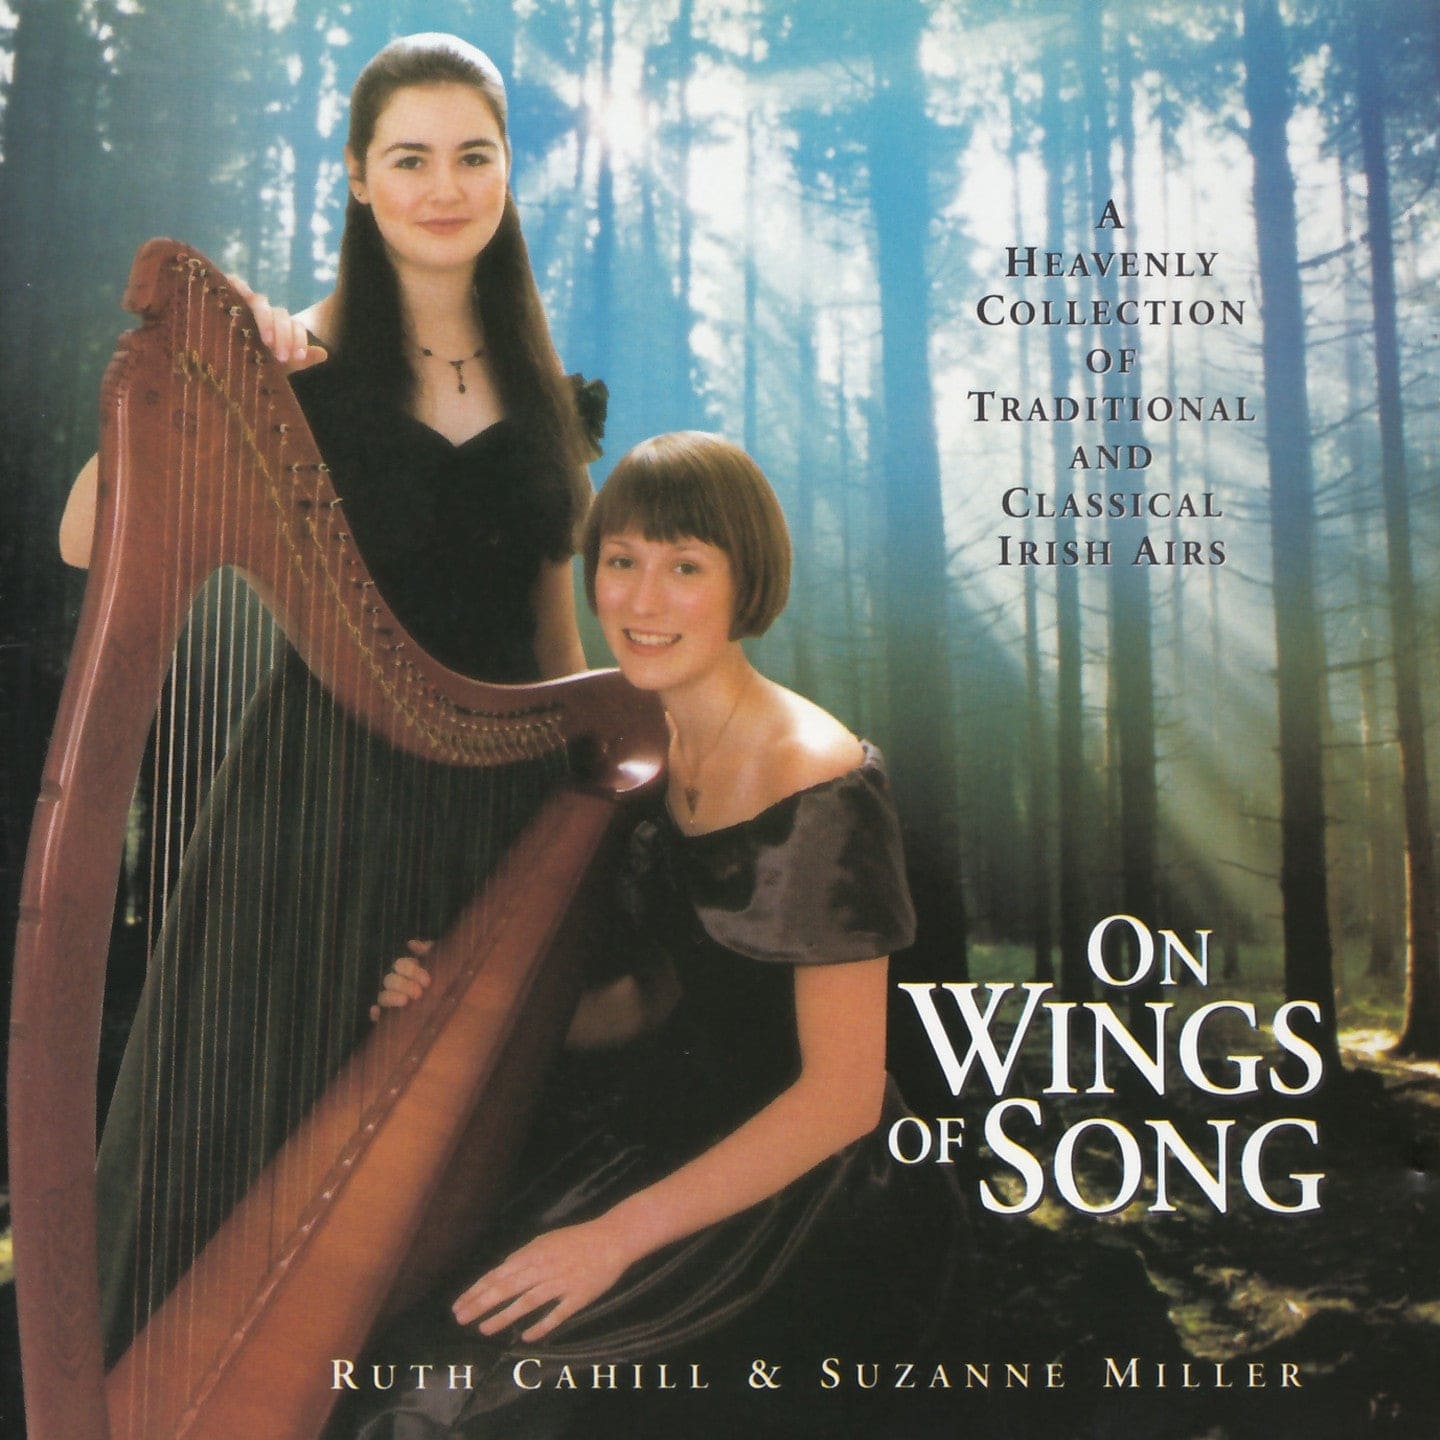 On Wings Of Song - Ruth Cahill & Suzanne Miller [CD]